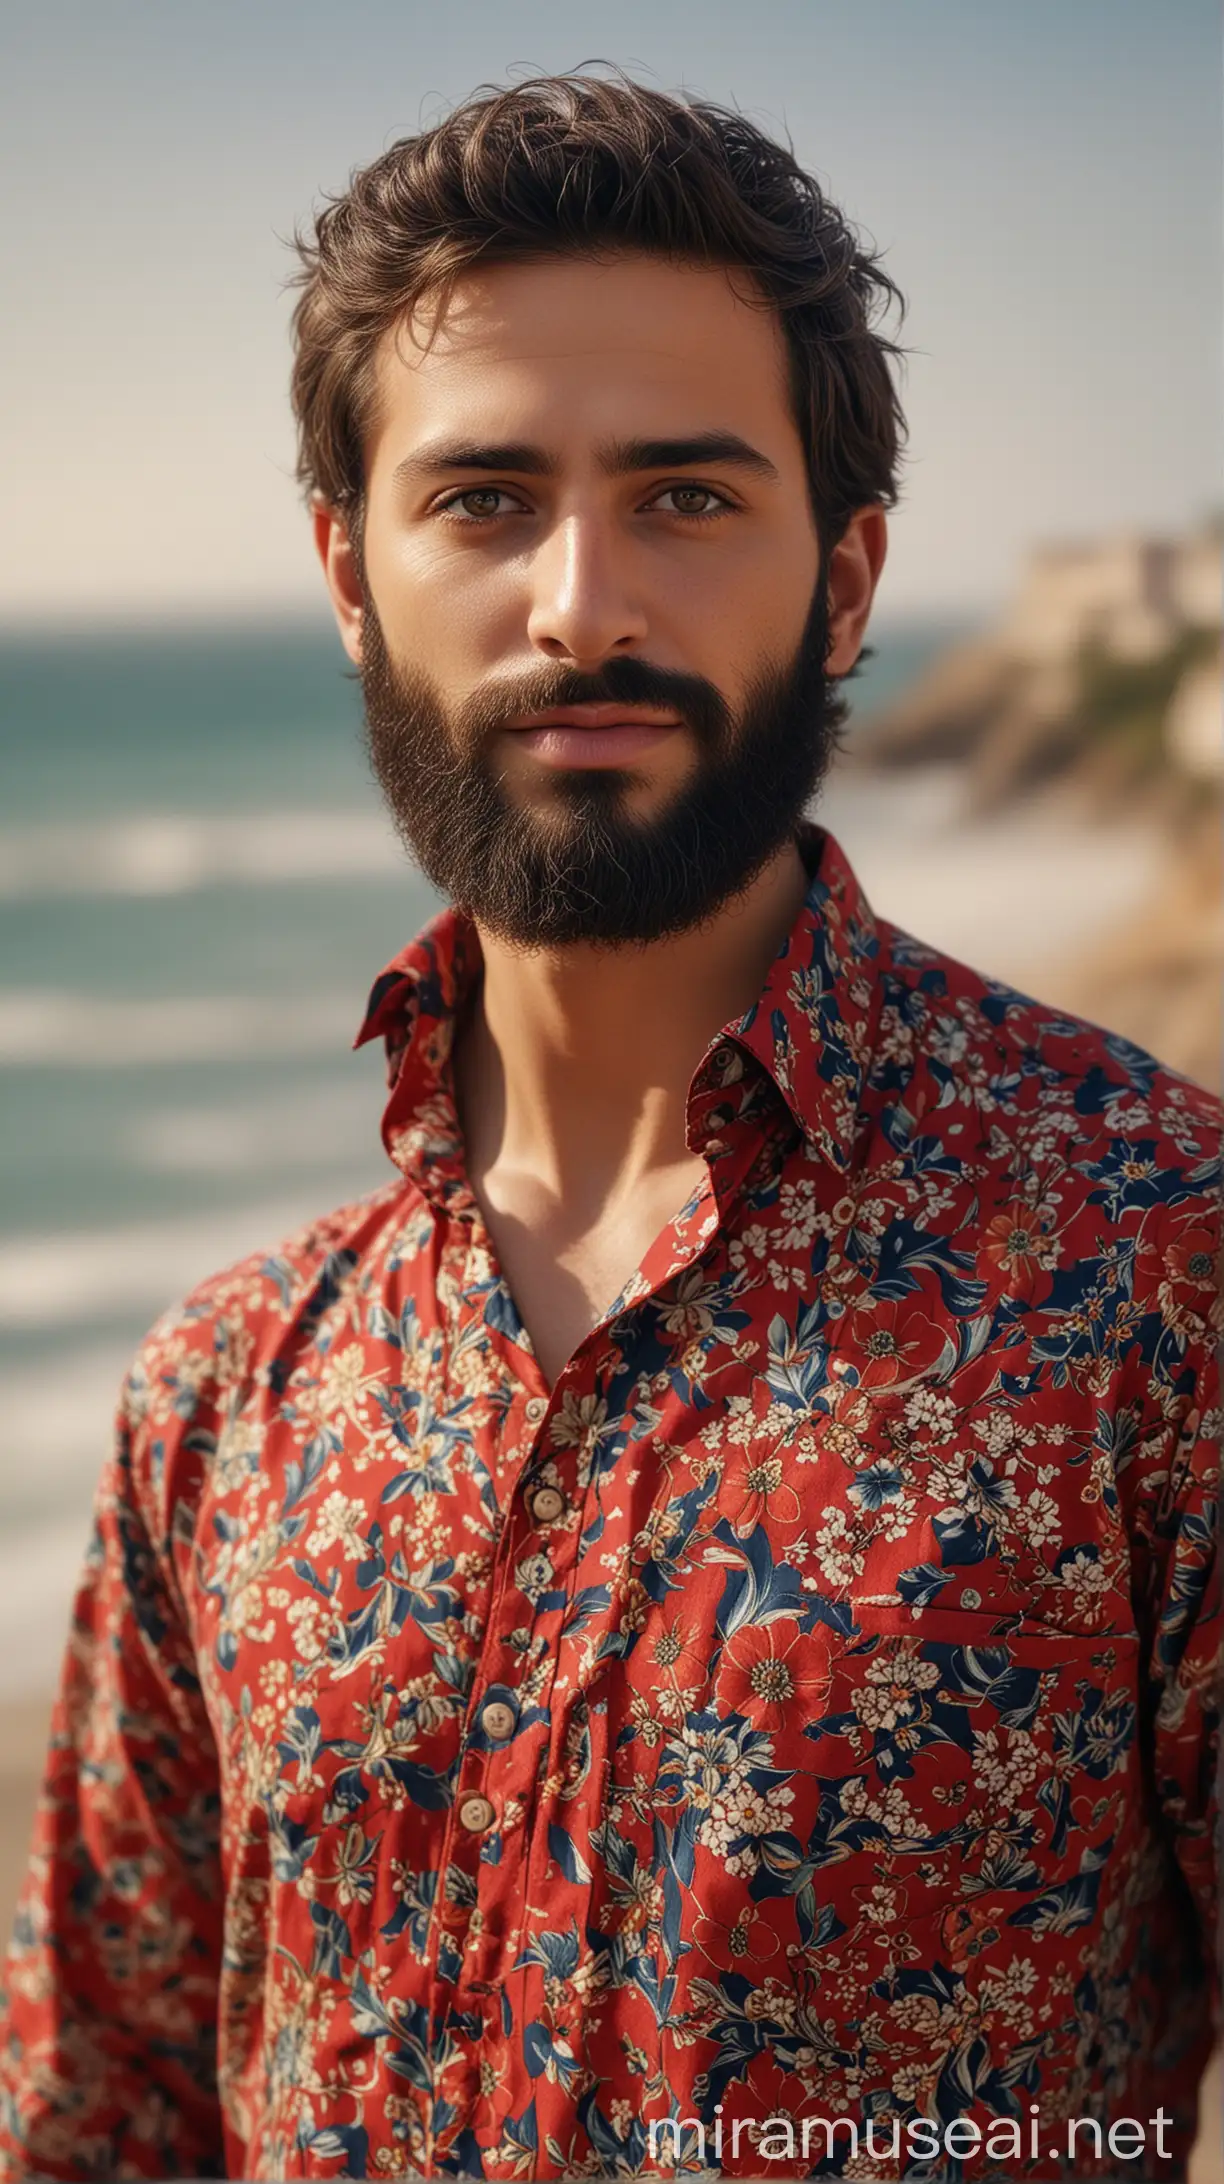 Create a hyper-realistic, 8K image of a beard man  with trimmed hair ,wearing red floral printed shirt and navy pant  , ensuring only his  eyes are beautiful. The image should capture intricate details, highlighting the texture and fabric   WITH GOLD trim TOUCH. Focus on the natural expression in his  eyes, conveying a sense of grace. The background should be softly blurred  WITH beach view to emphasize the subject, with natural lighting enhancing the realism and depth of the image. The overall composition should reflect respect and beauty, showcasing the cultural significance of the Arab .